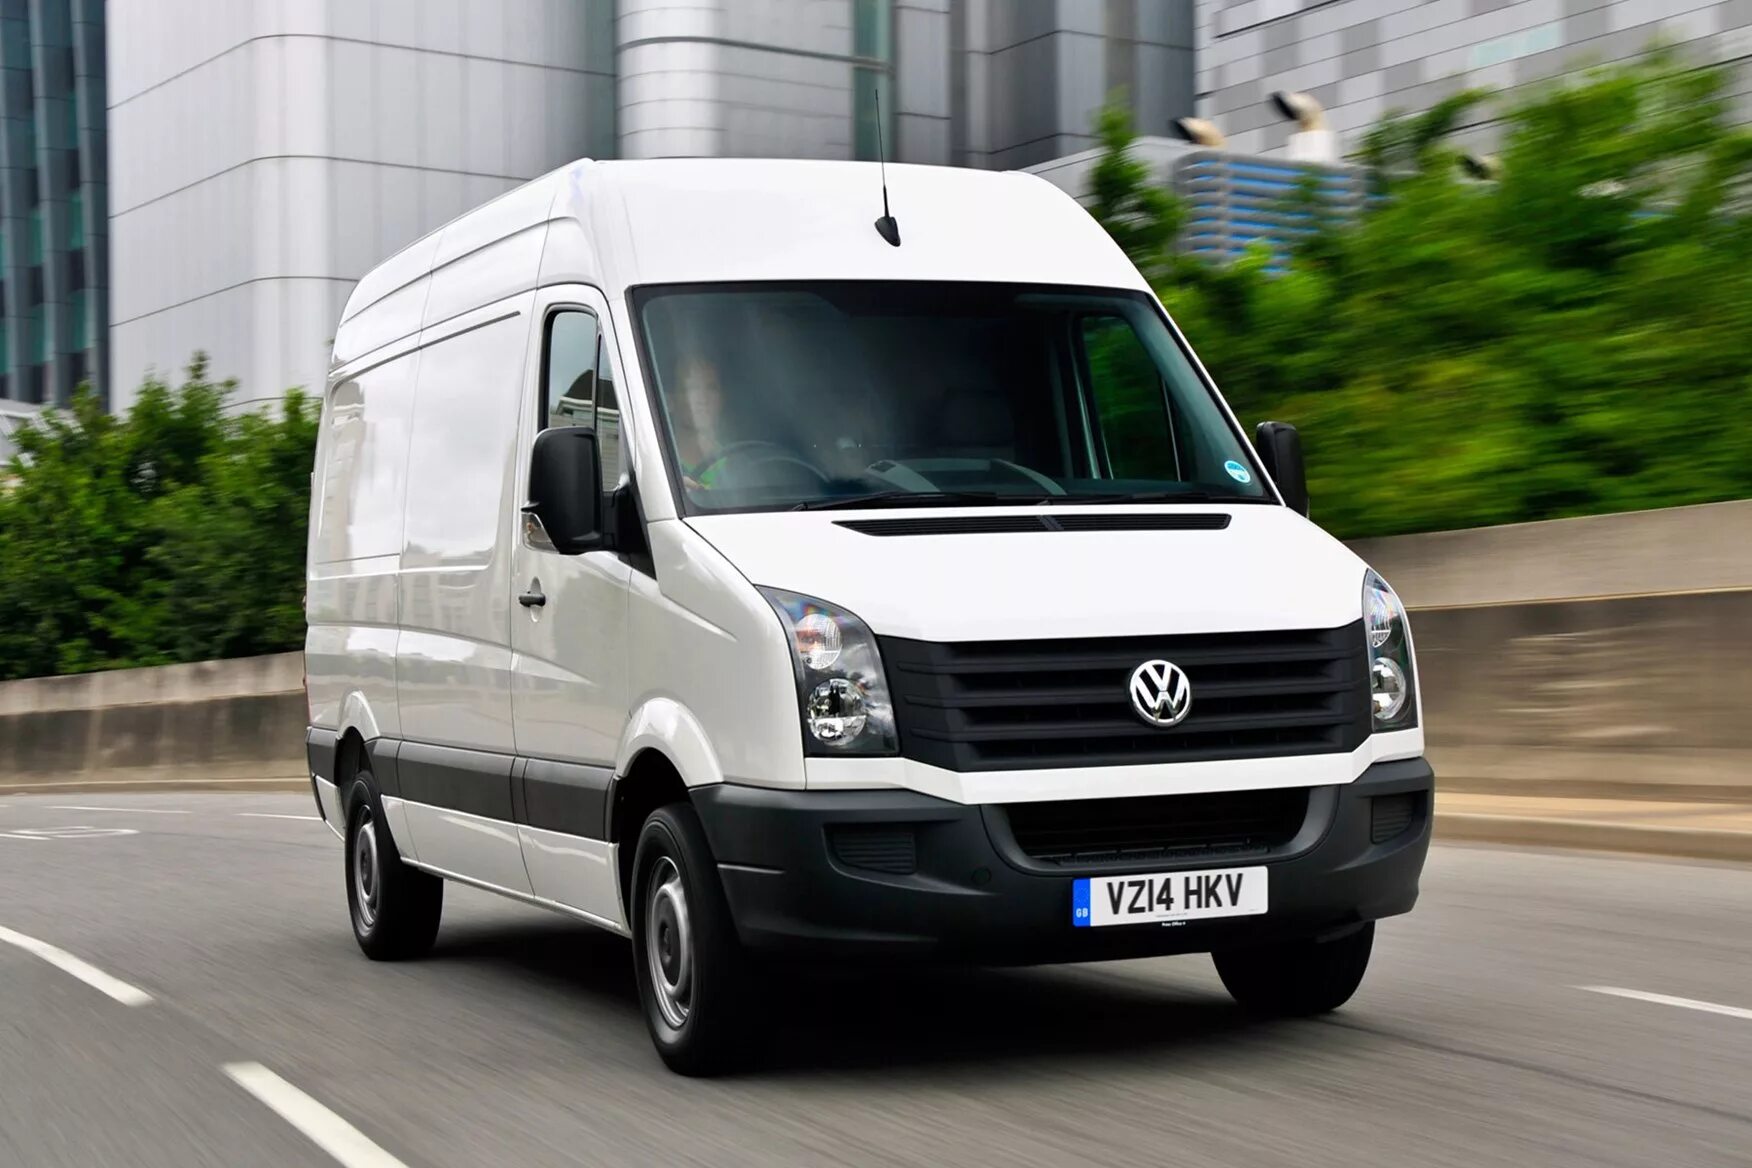 VW Crafter 2016. Фольксваген Crafter 2016. Фольксваген Крафтер 2011. Фольксваген Крафтер новый. Volkswagen crafter 2.0